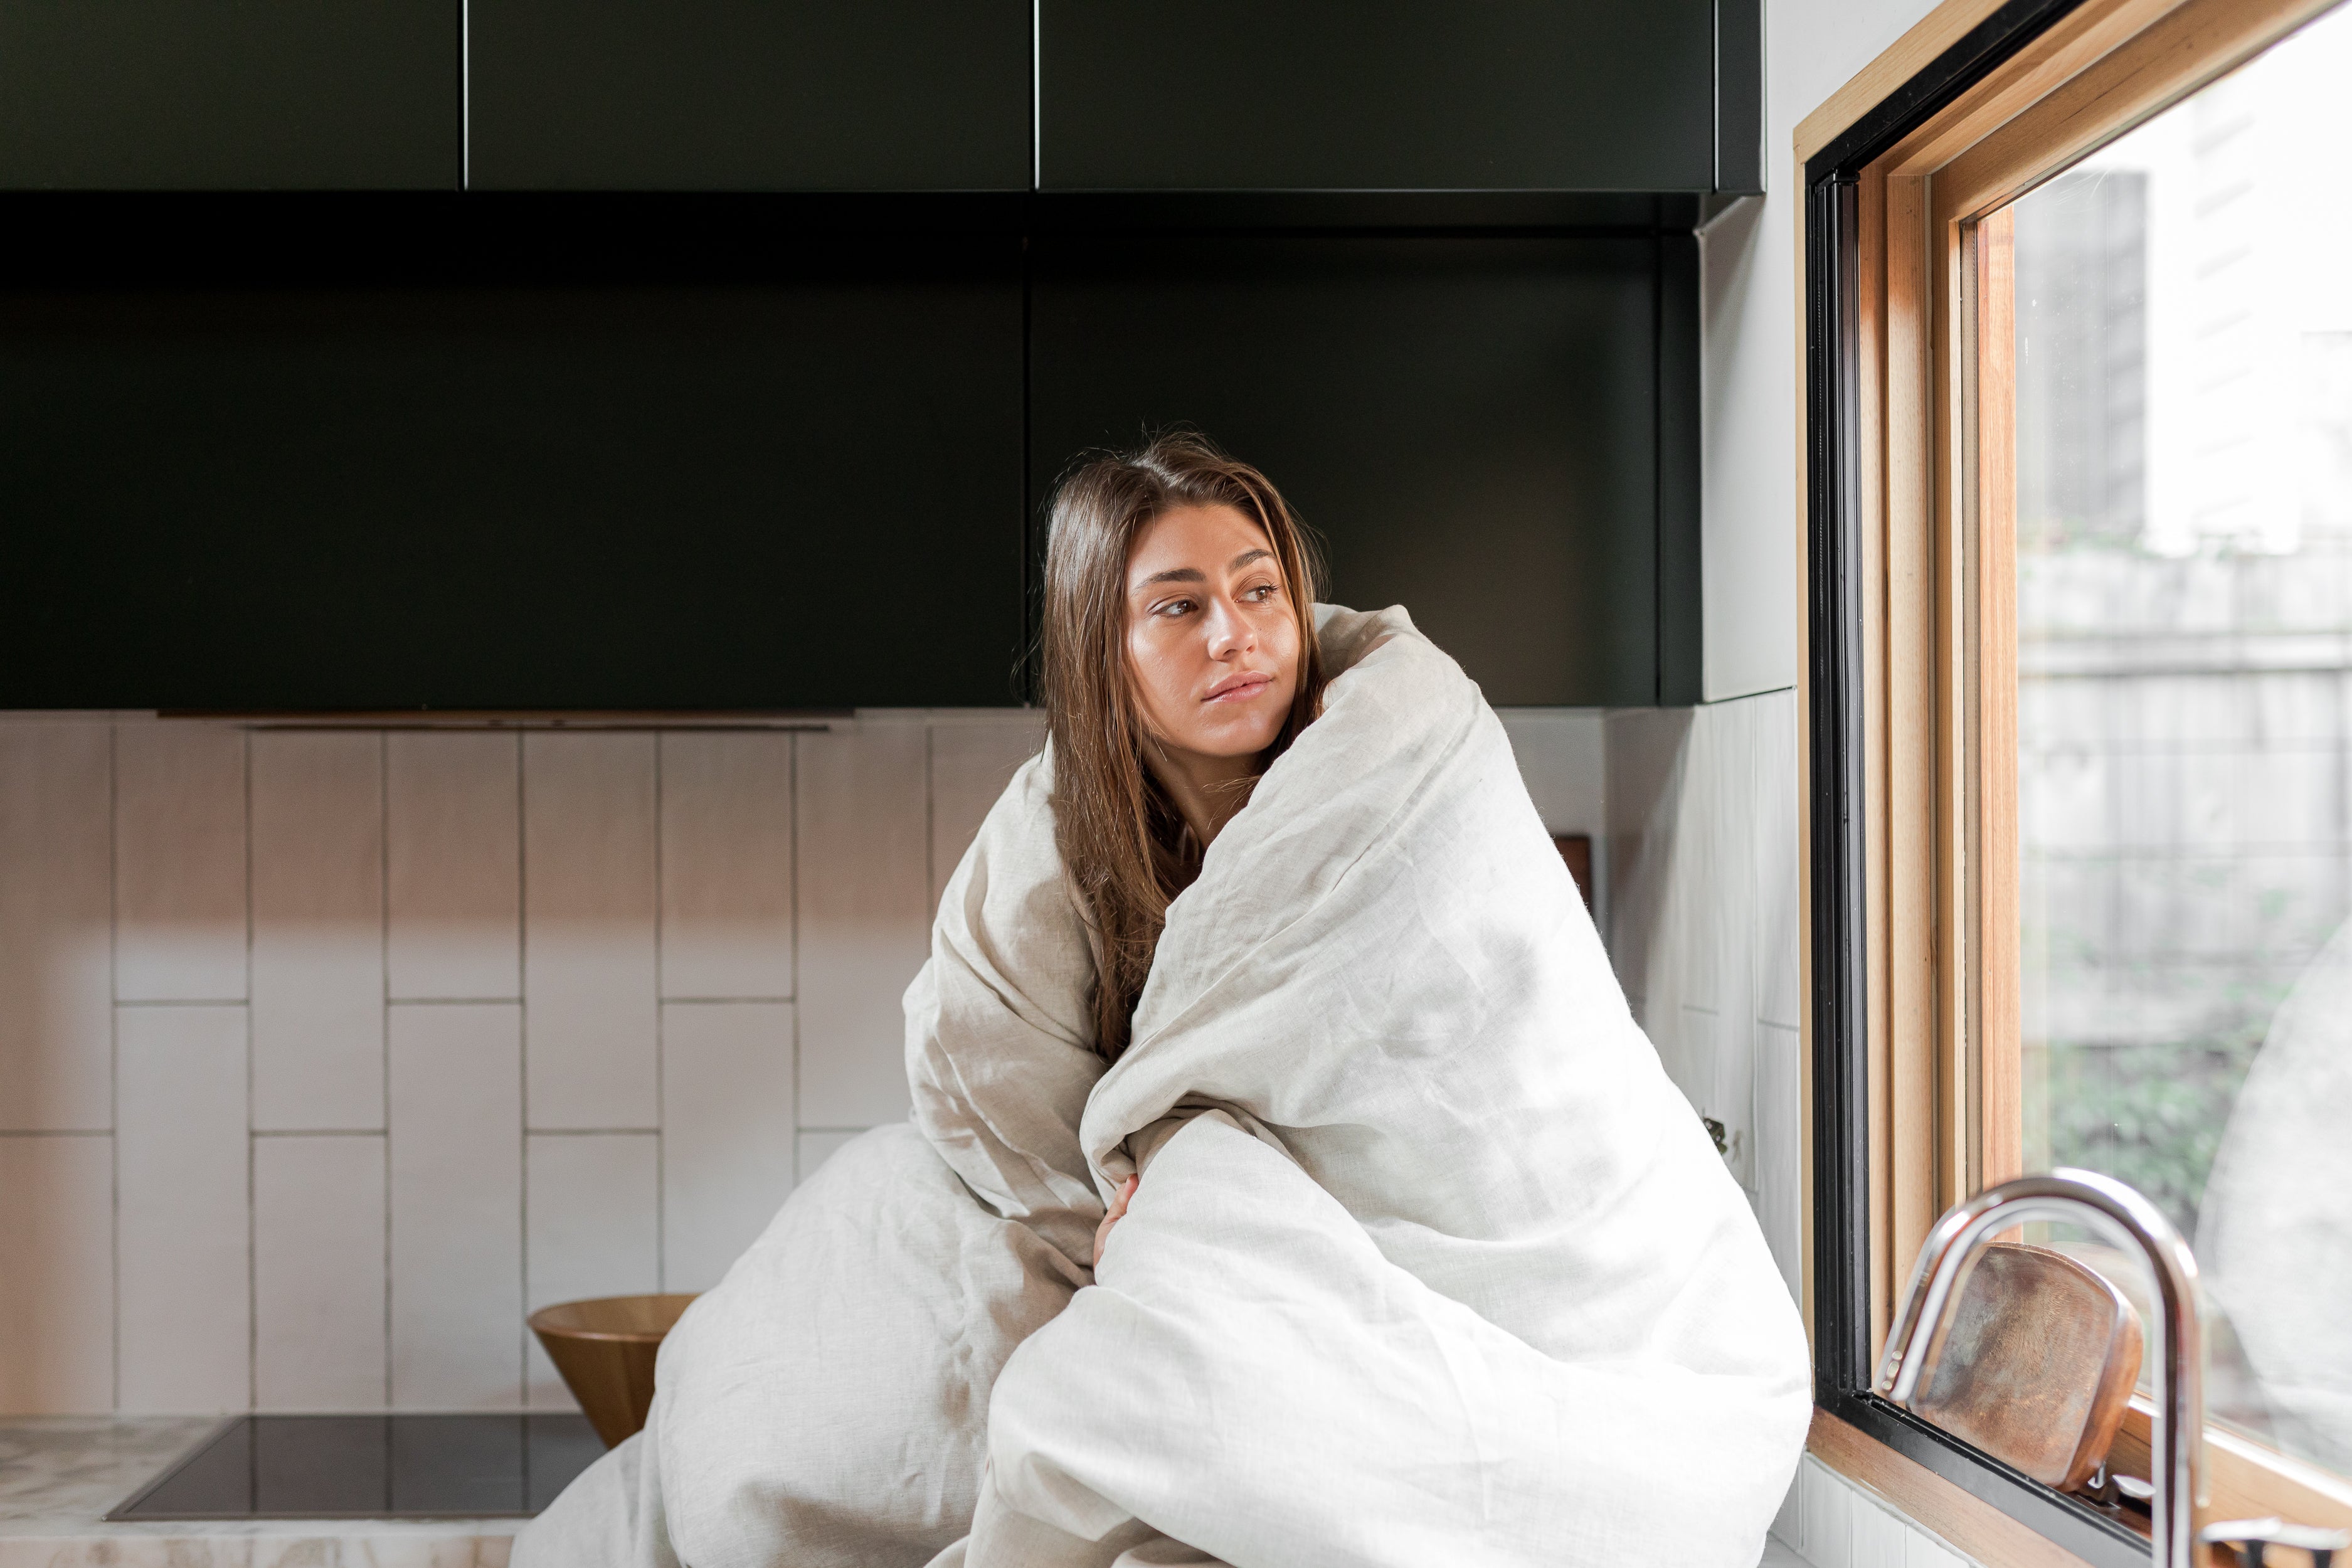 Woman looking out window with duvet